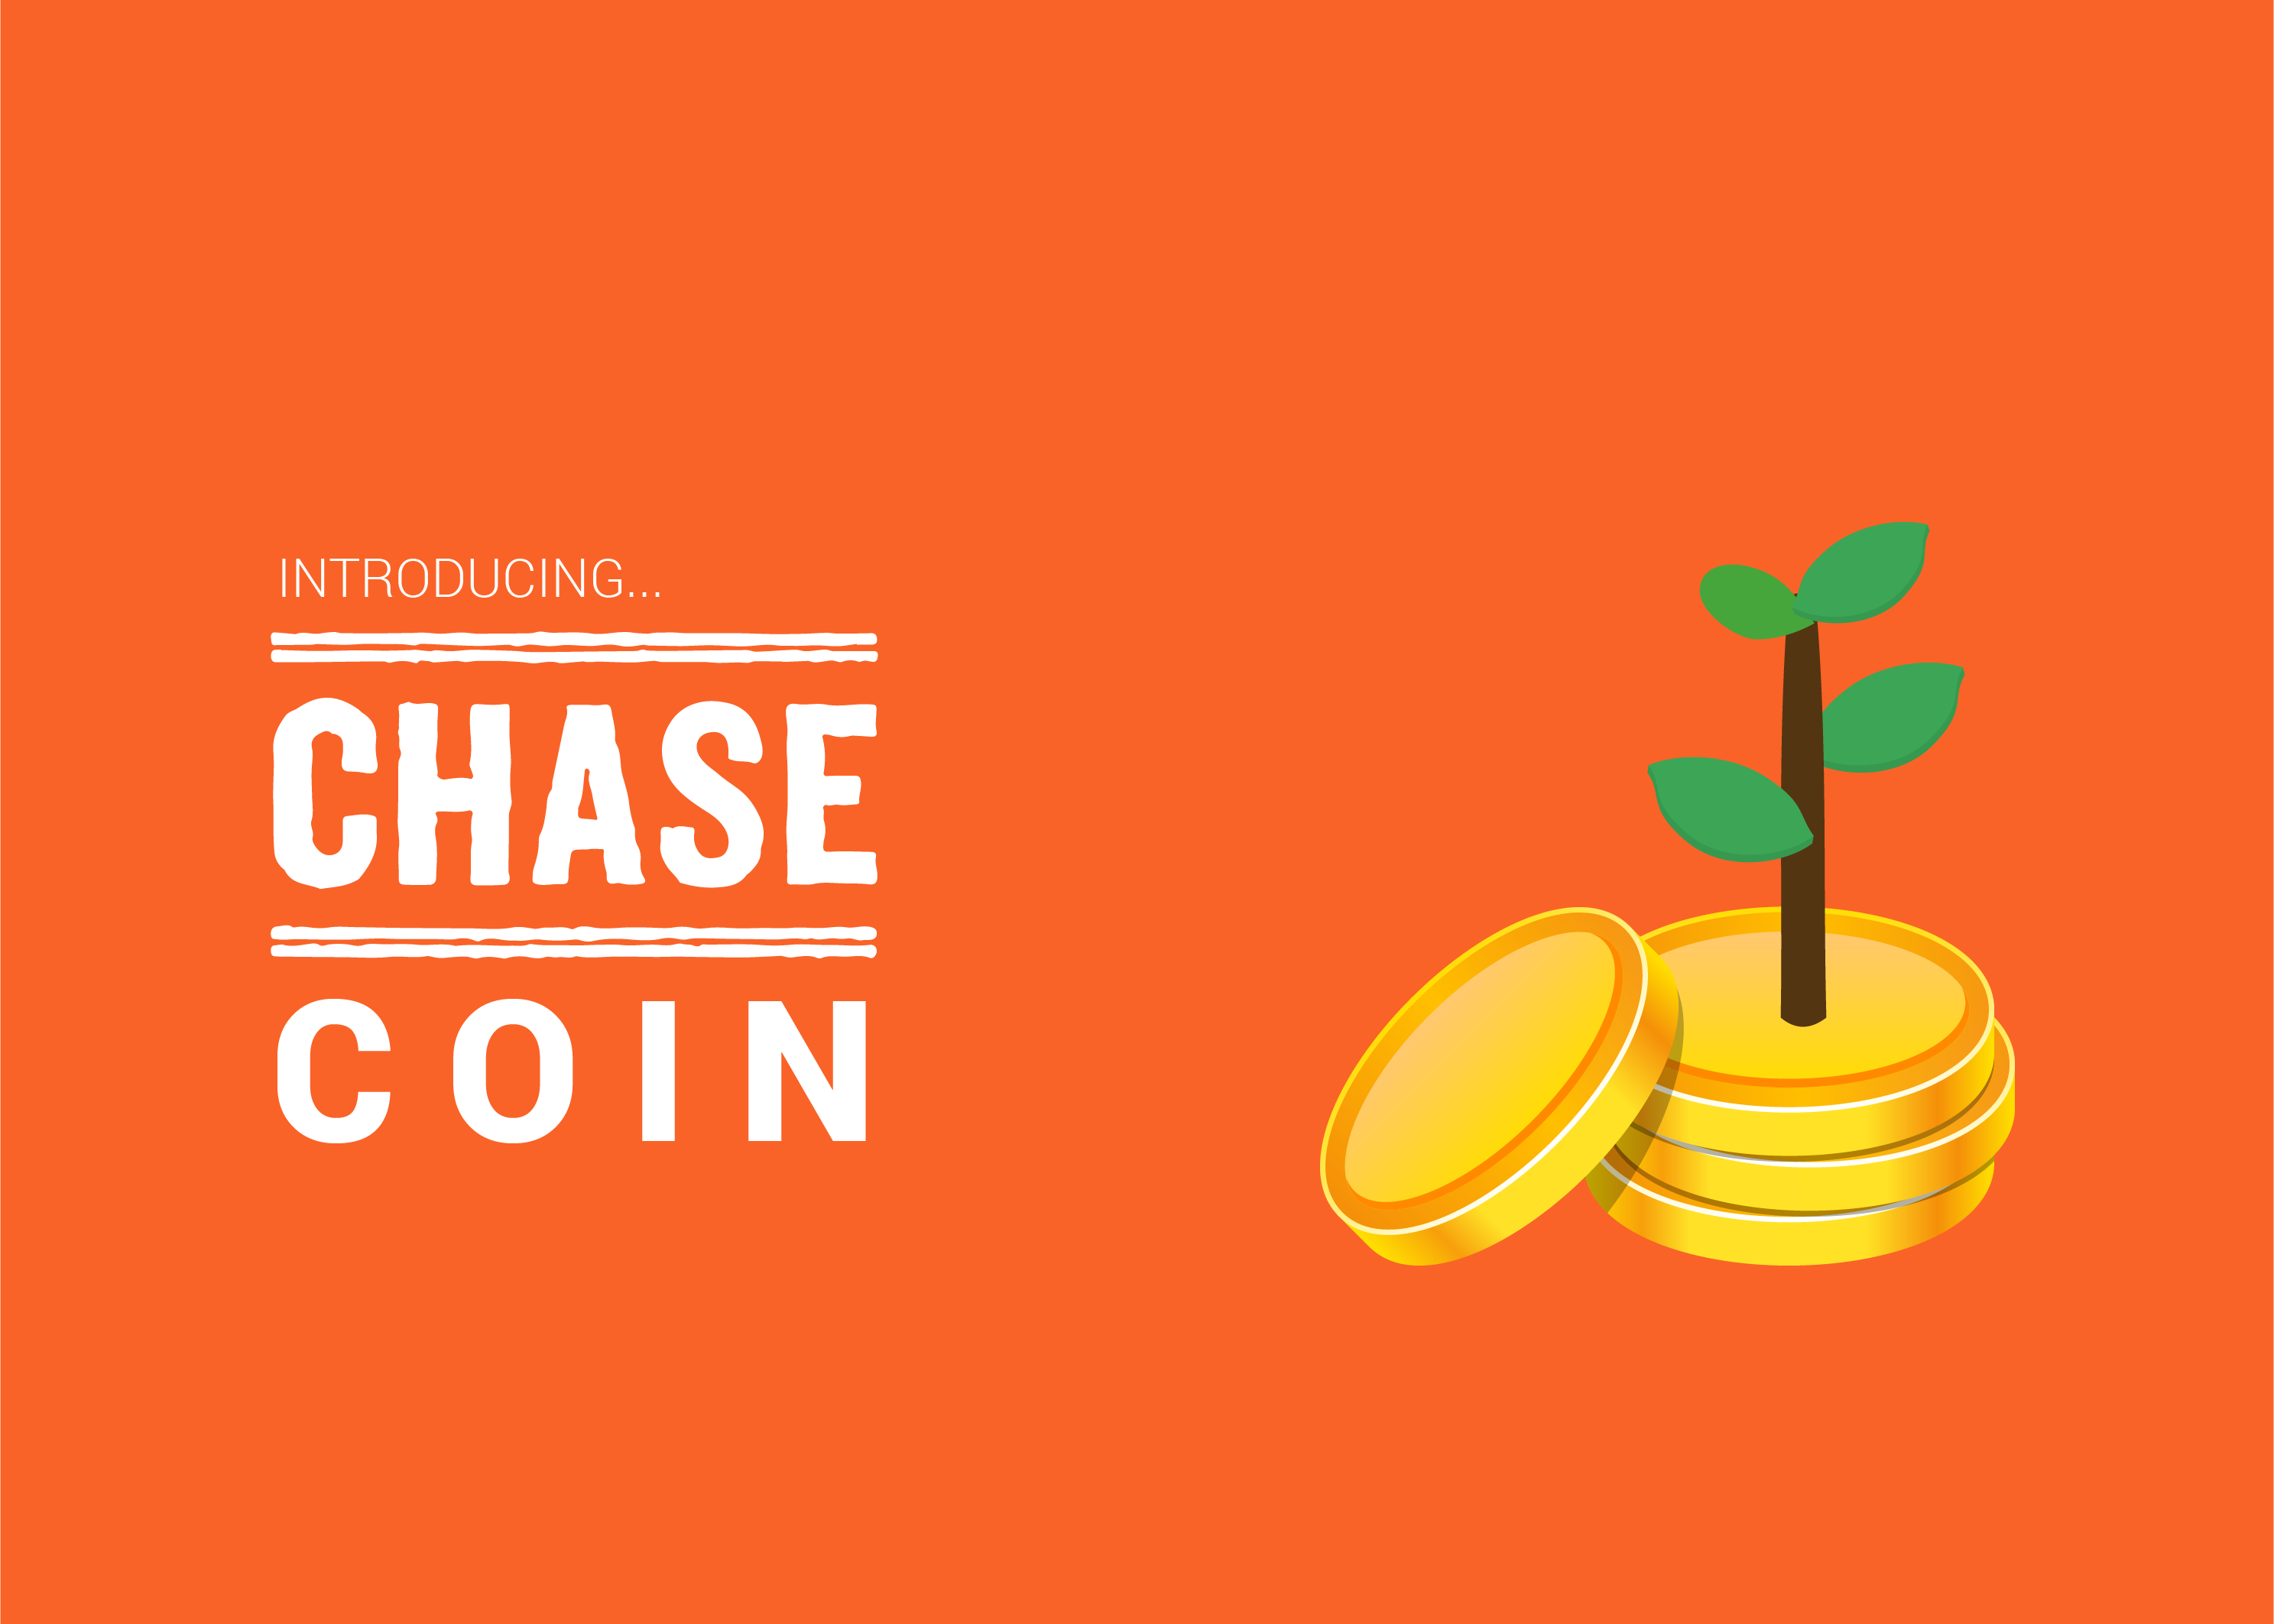 Introducing ChaseCoin: Credit control’s answer to cryptocurrency